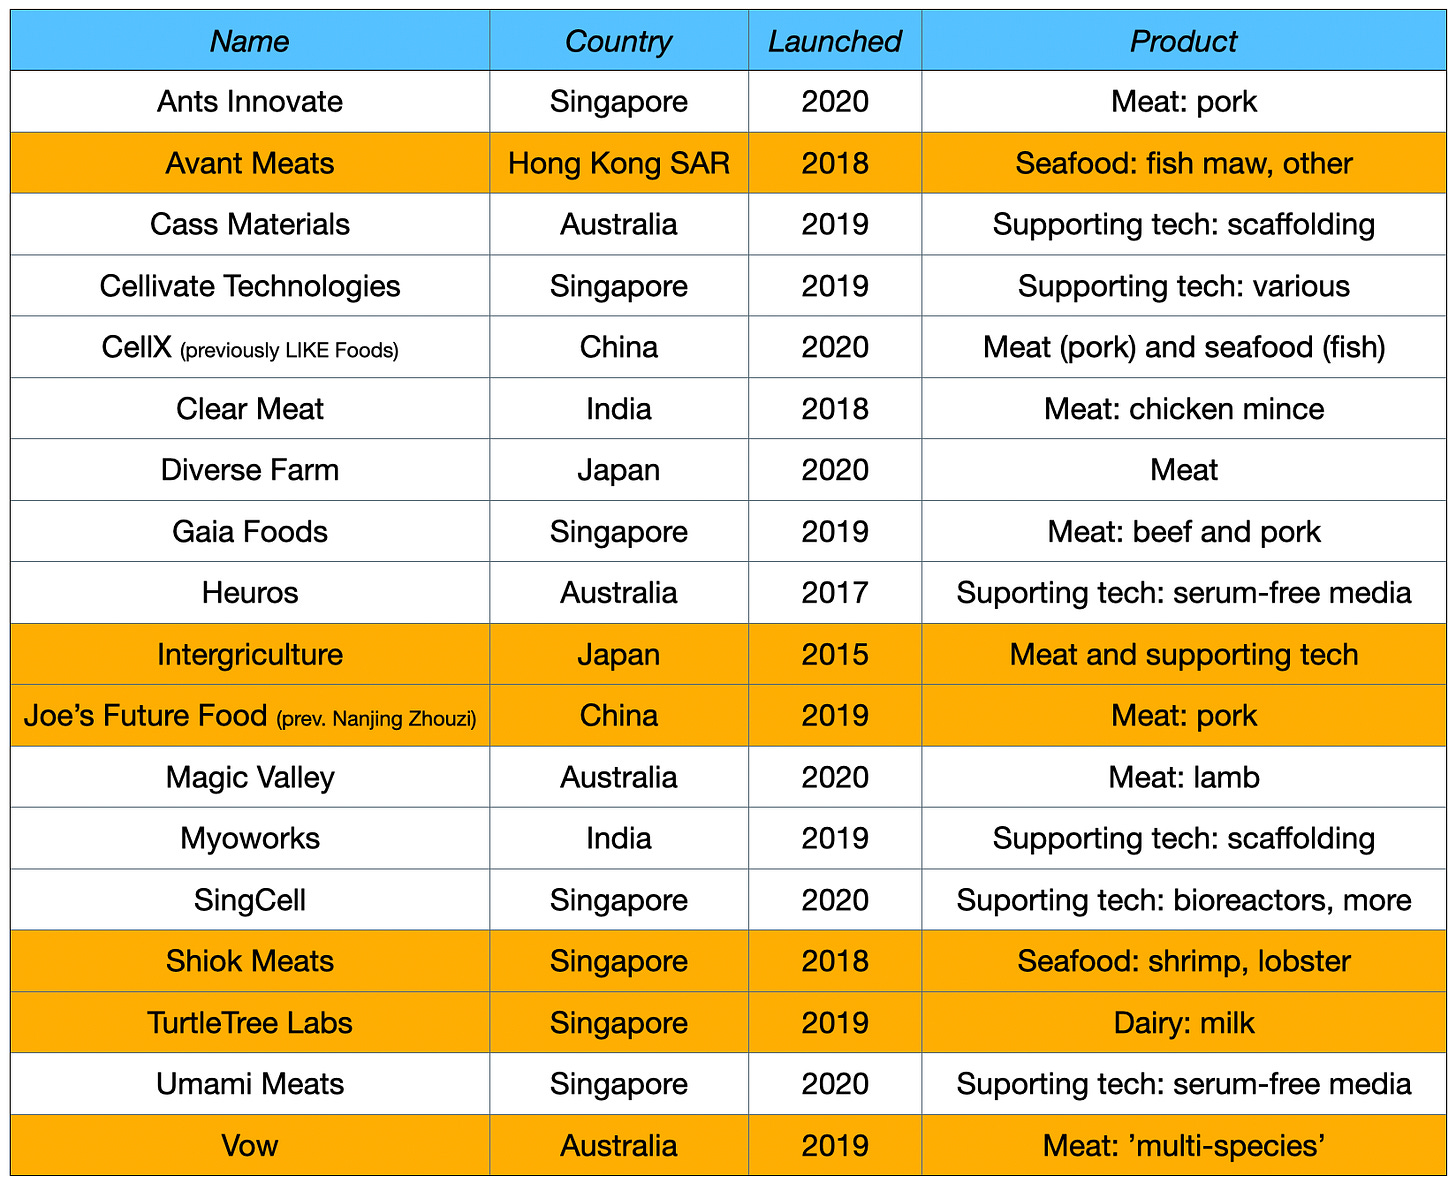 Cell-based startups in APAC (highlight: $500k+ funding), source: own research